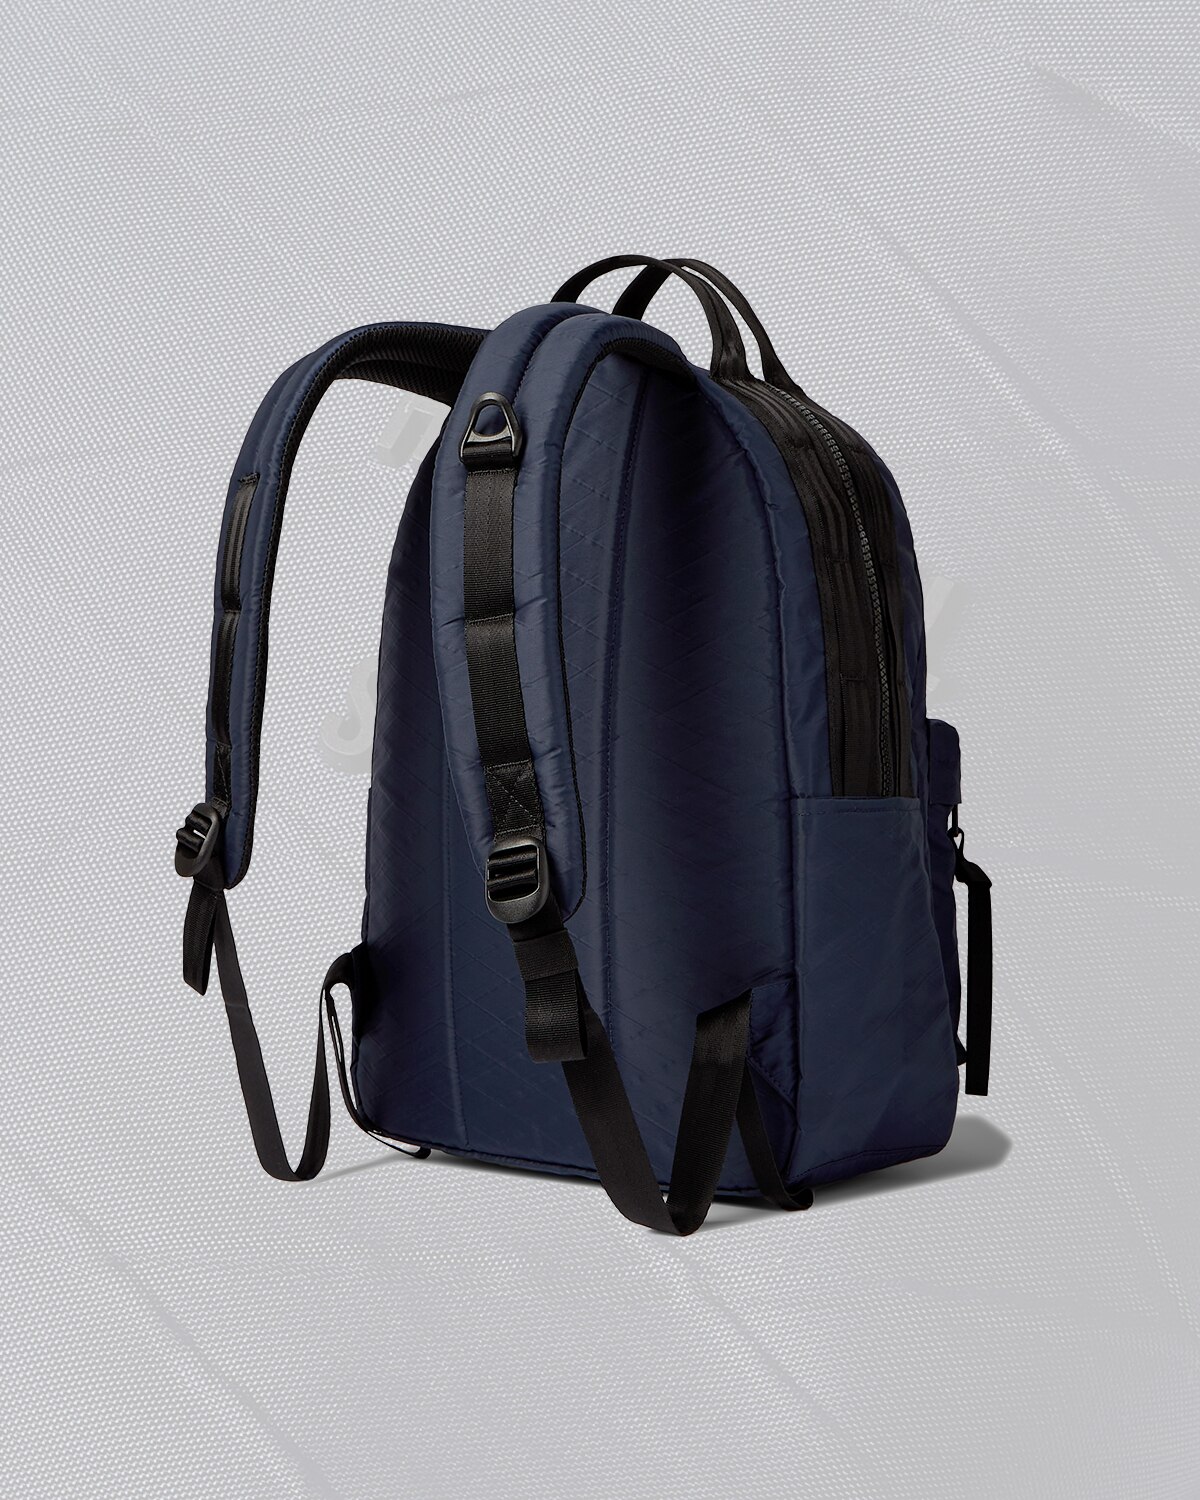 Annihilate sum Swipe Four Versatile Herschel Supply Co Bags For Every Occasion (And Exclusive To  MR PORTER) | The Journal | MR PORTER